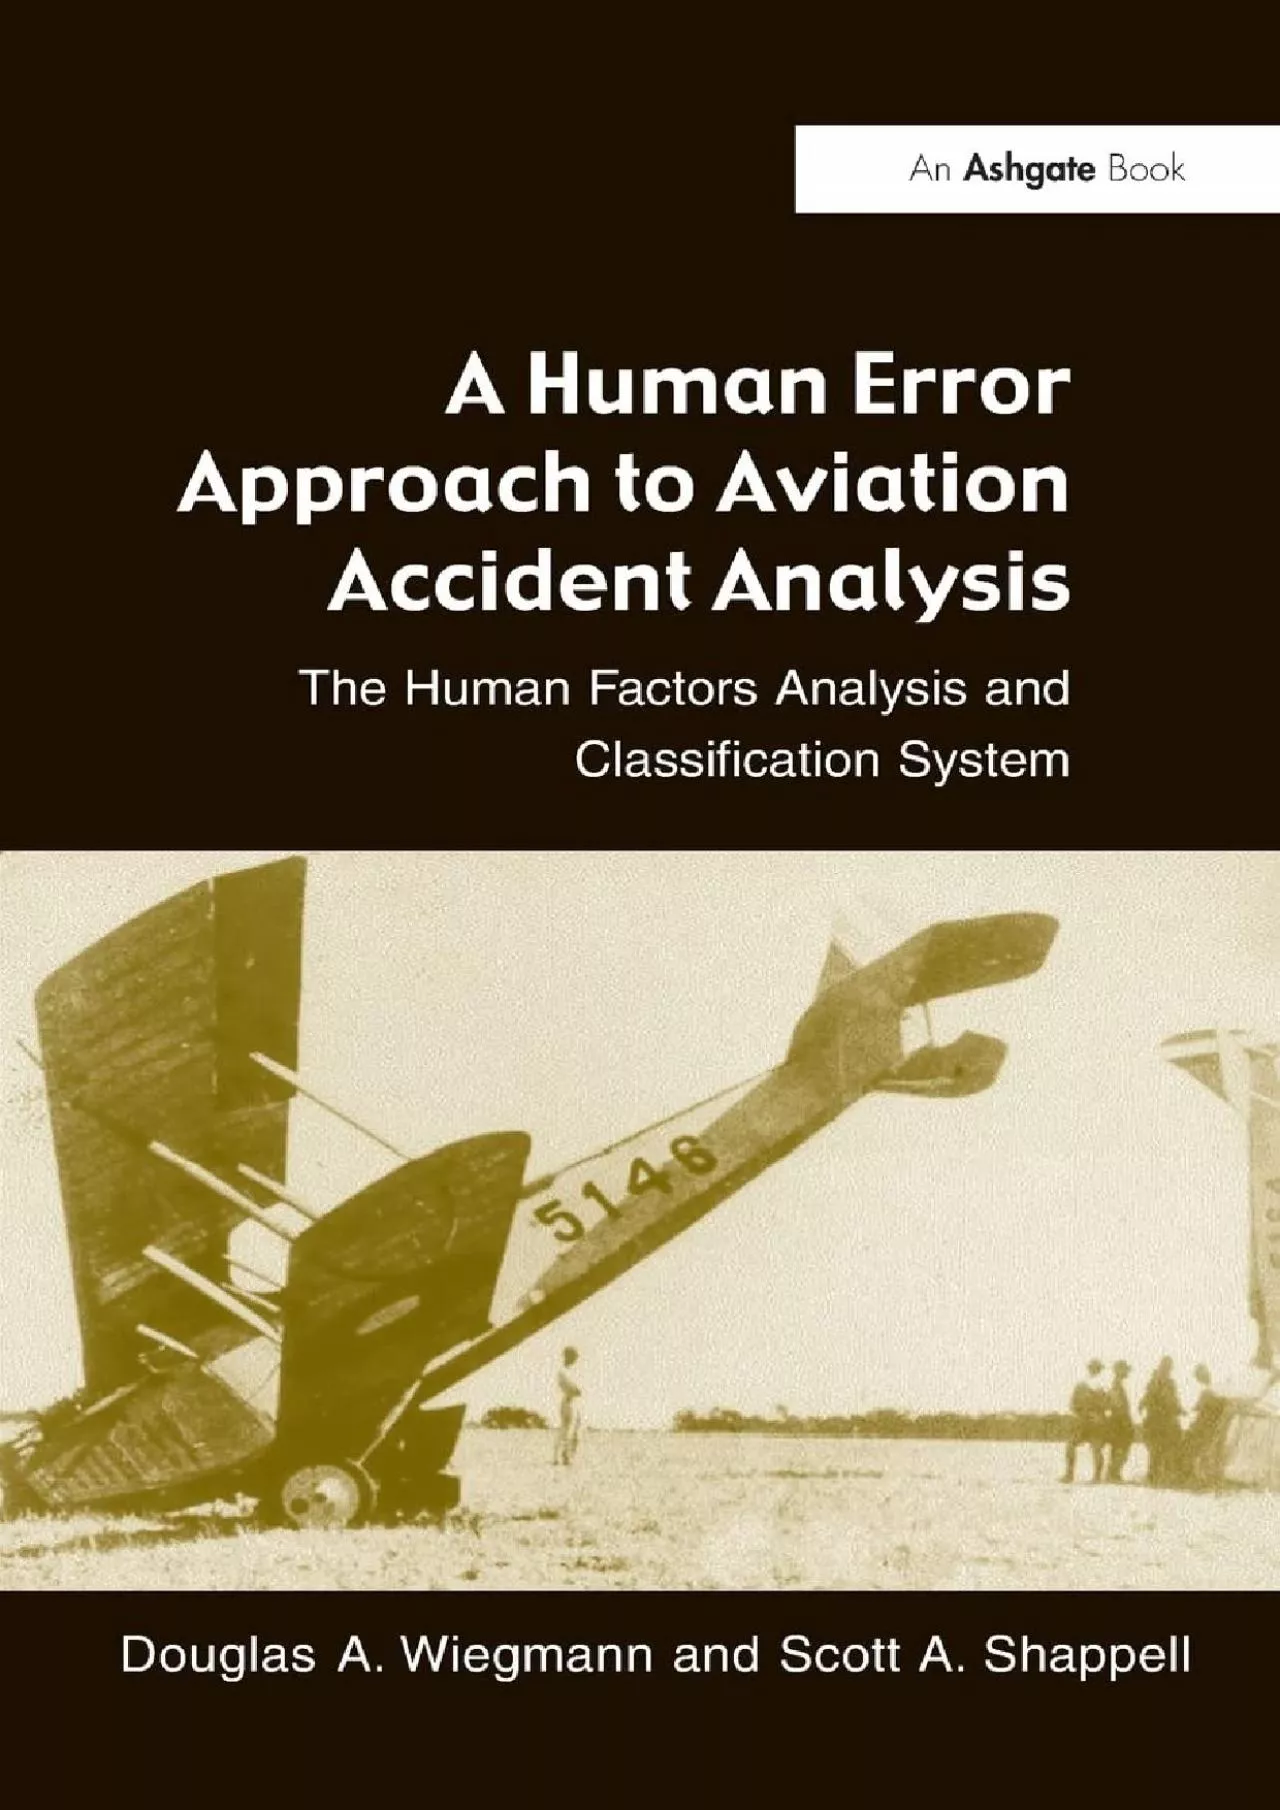 (BOOK)-A Human Error Approach to Aviation Accident Analysis: The Human Factors Analysis